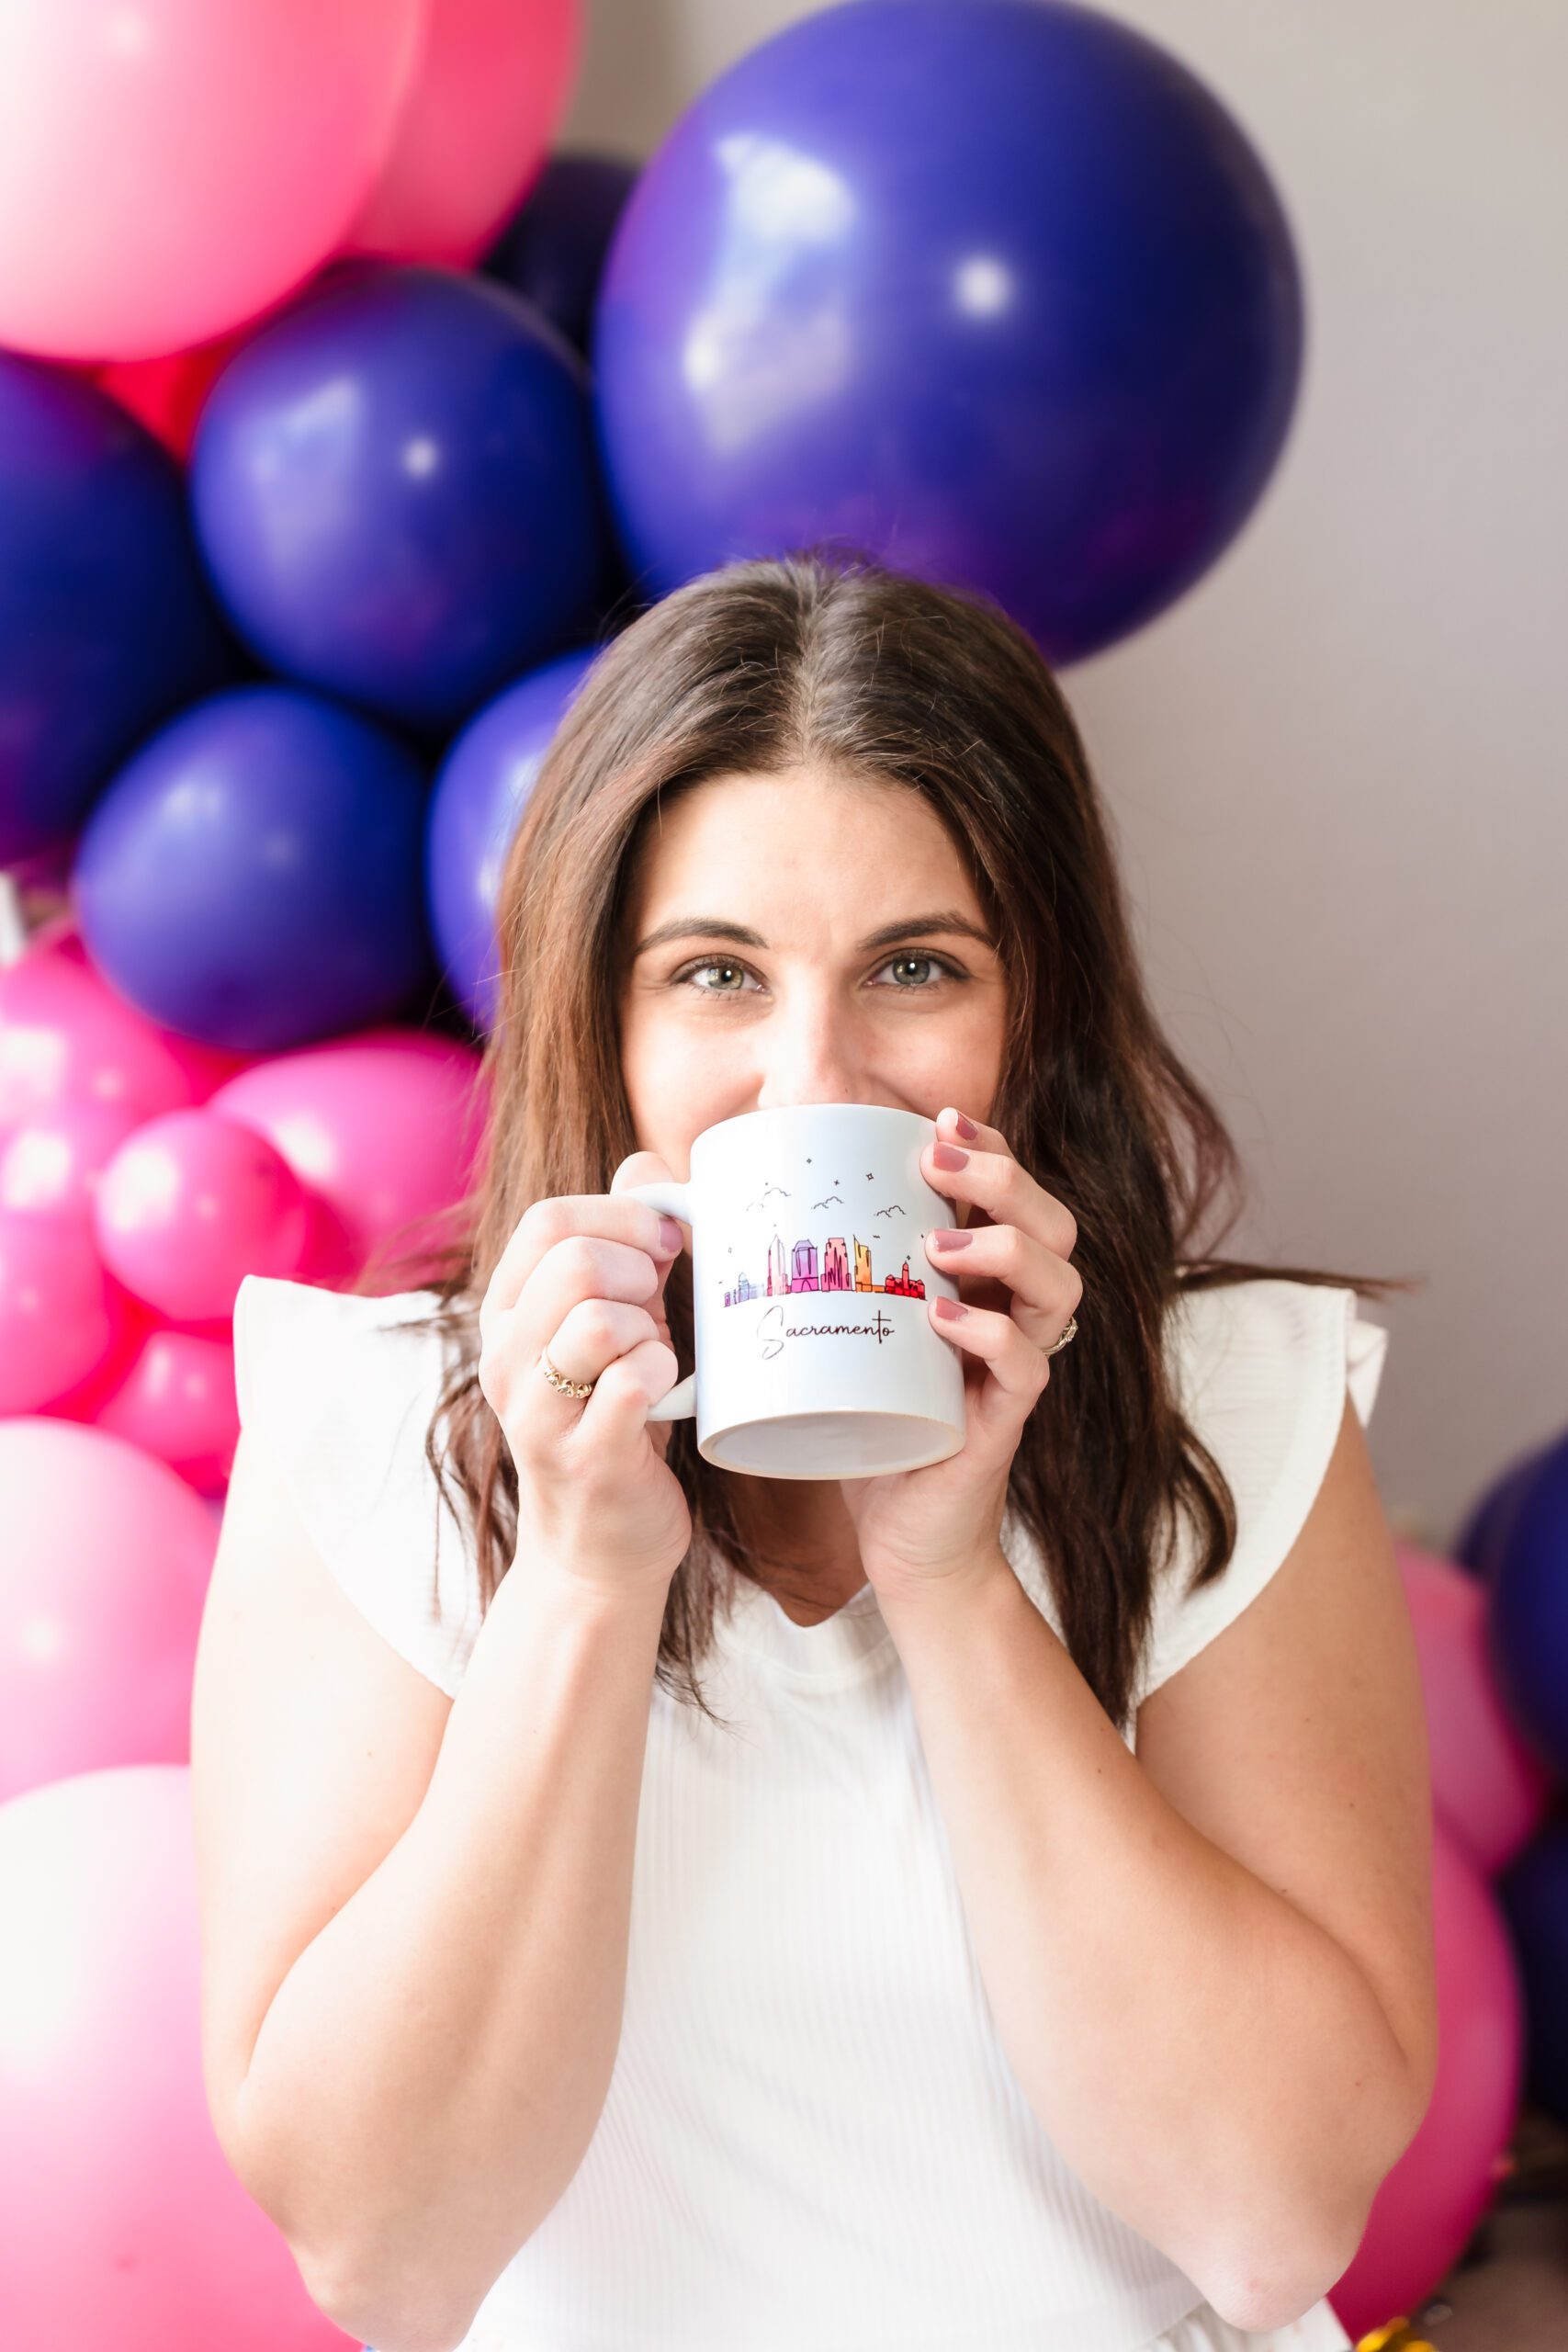 brand photo of a balloon business owner holding a on-brand mug